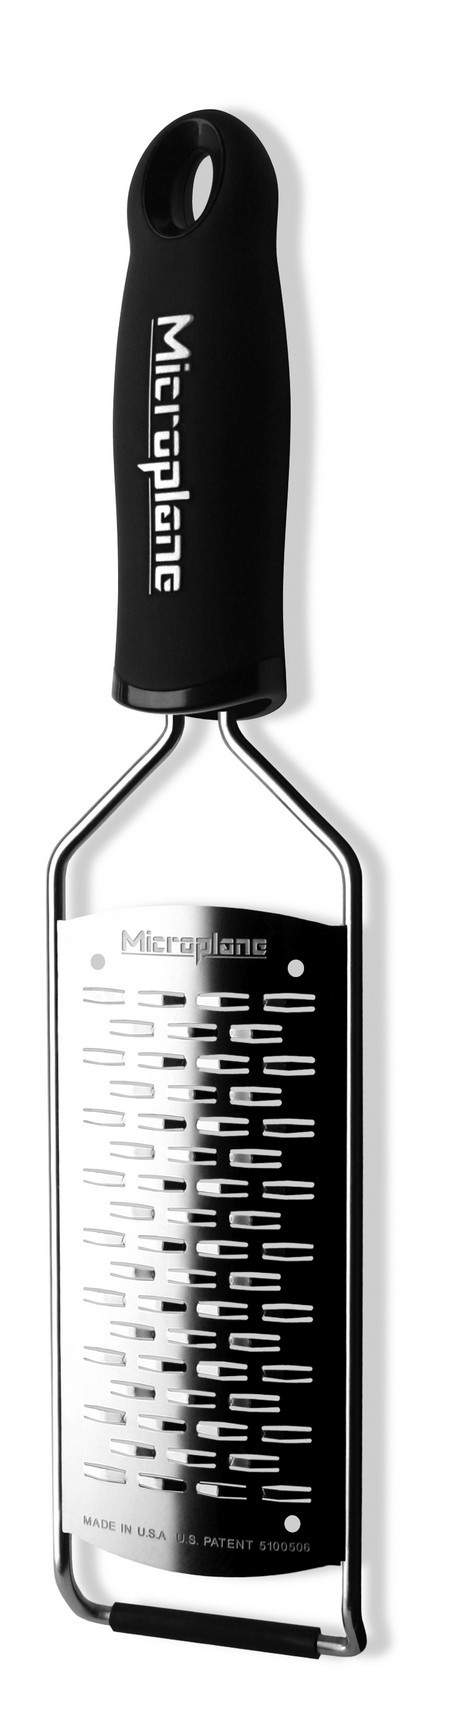 Buy the Microplane Gourmet Ribbon Grater online at smithsofloughton.com